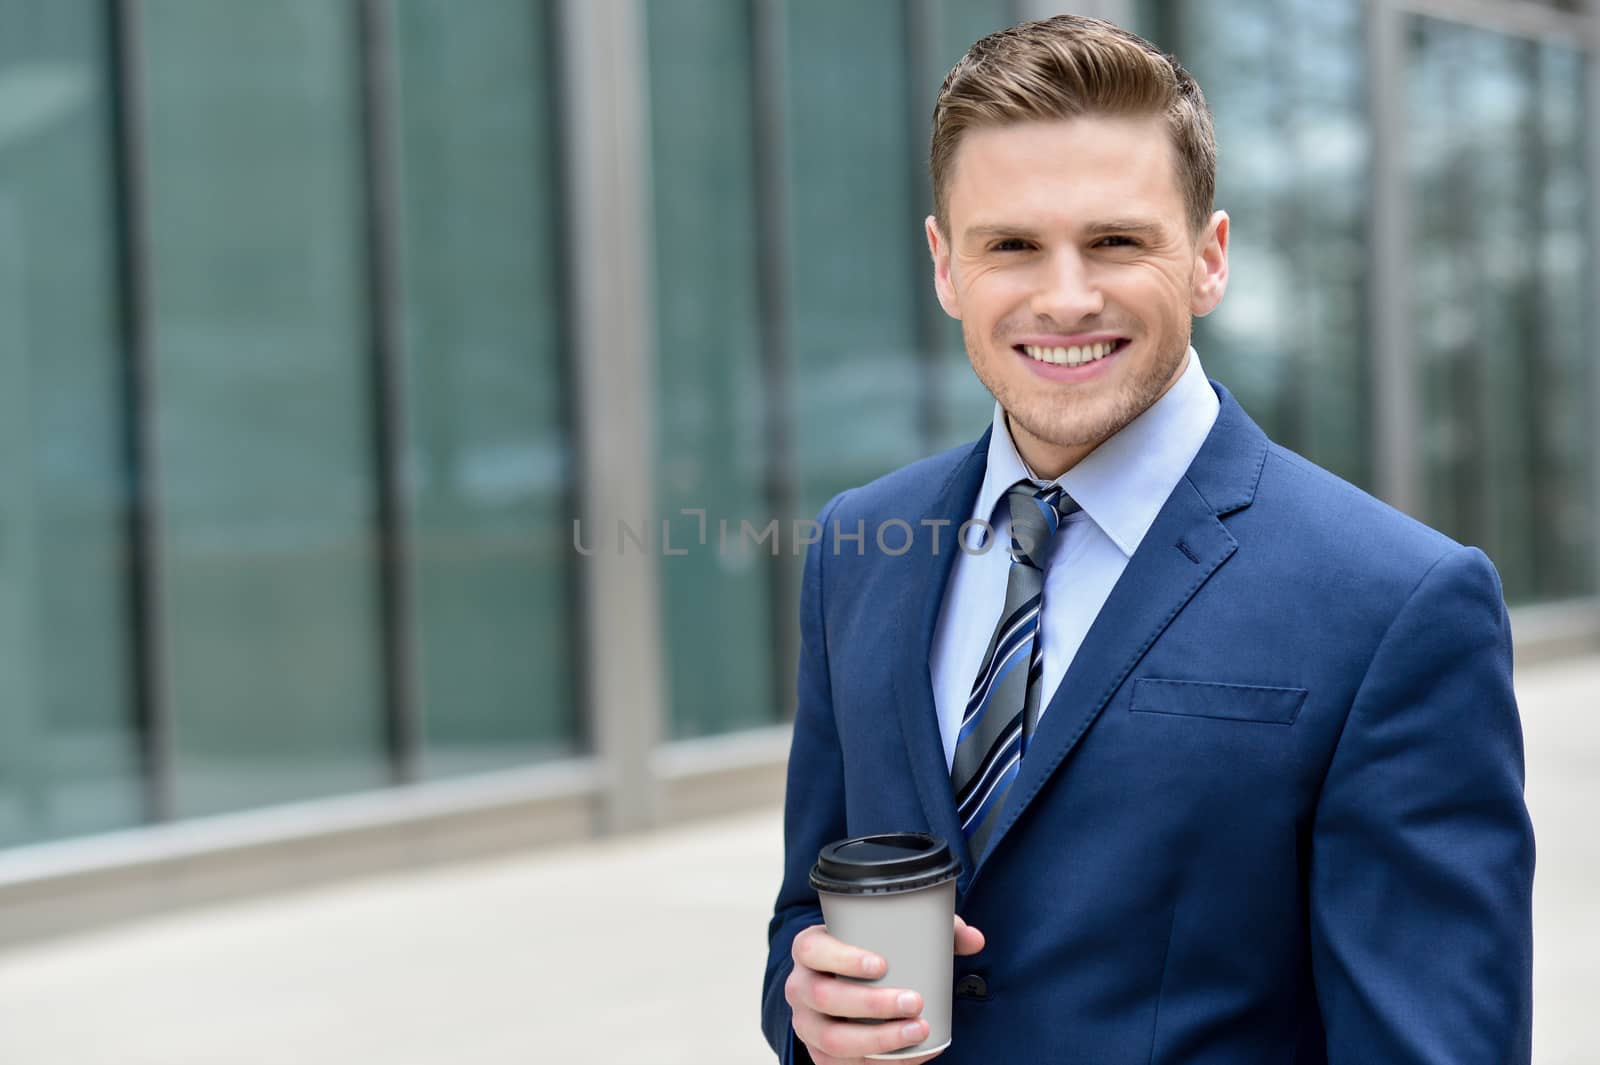 Smiling businessman with coffee sipper by stockyimages